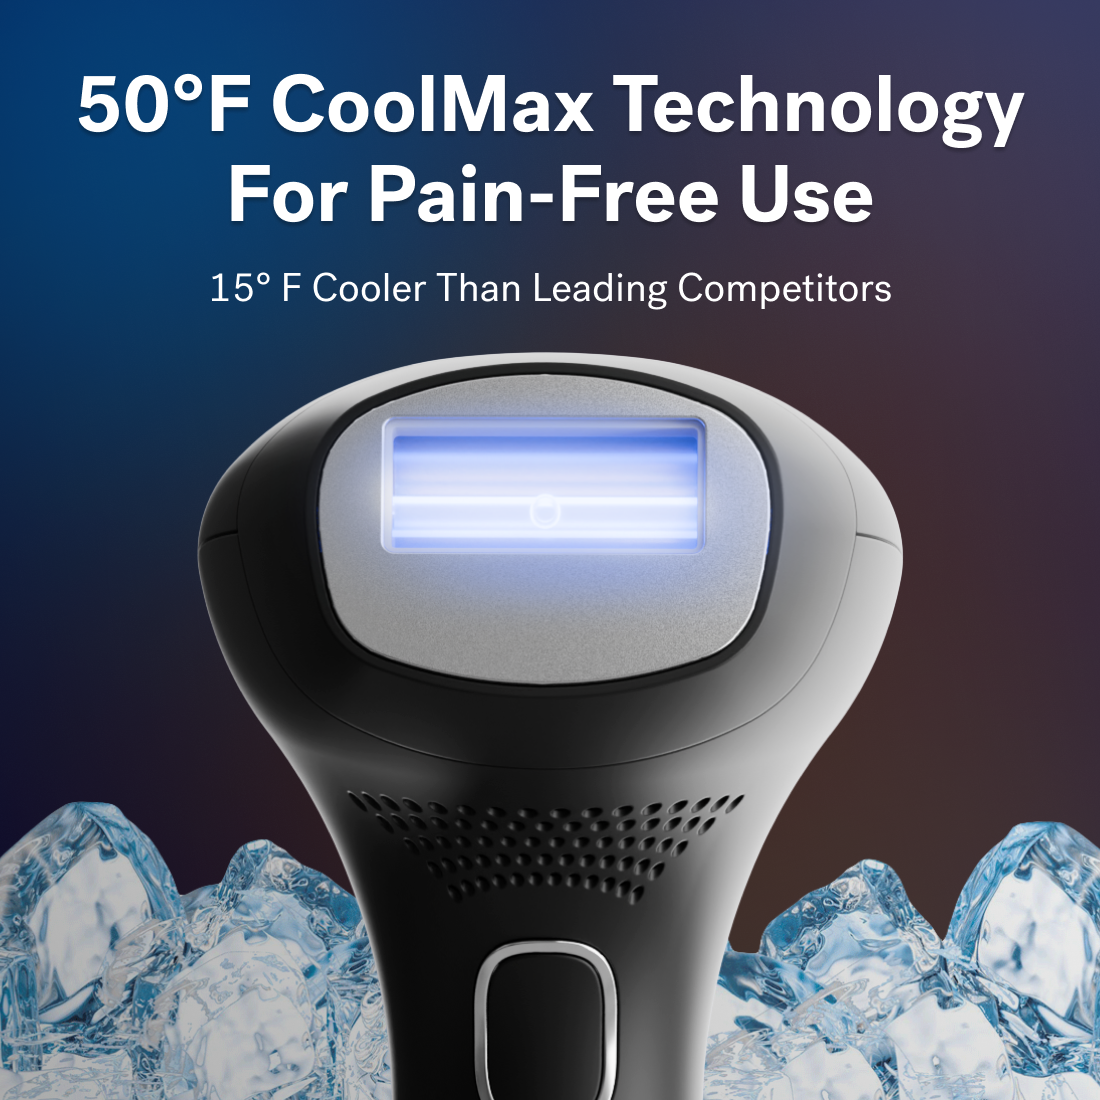 A black Lumos IPL device with 50°F COOLMAX cooling technology from Michael Todd Beauty is shown emitting blue light, surrounded by ice. Text states it's 15°F cooler than leading competitors and intended for pain-free permanent hair removal using IPL therapy.